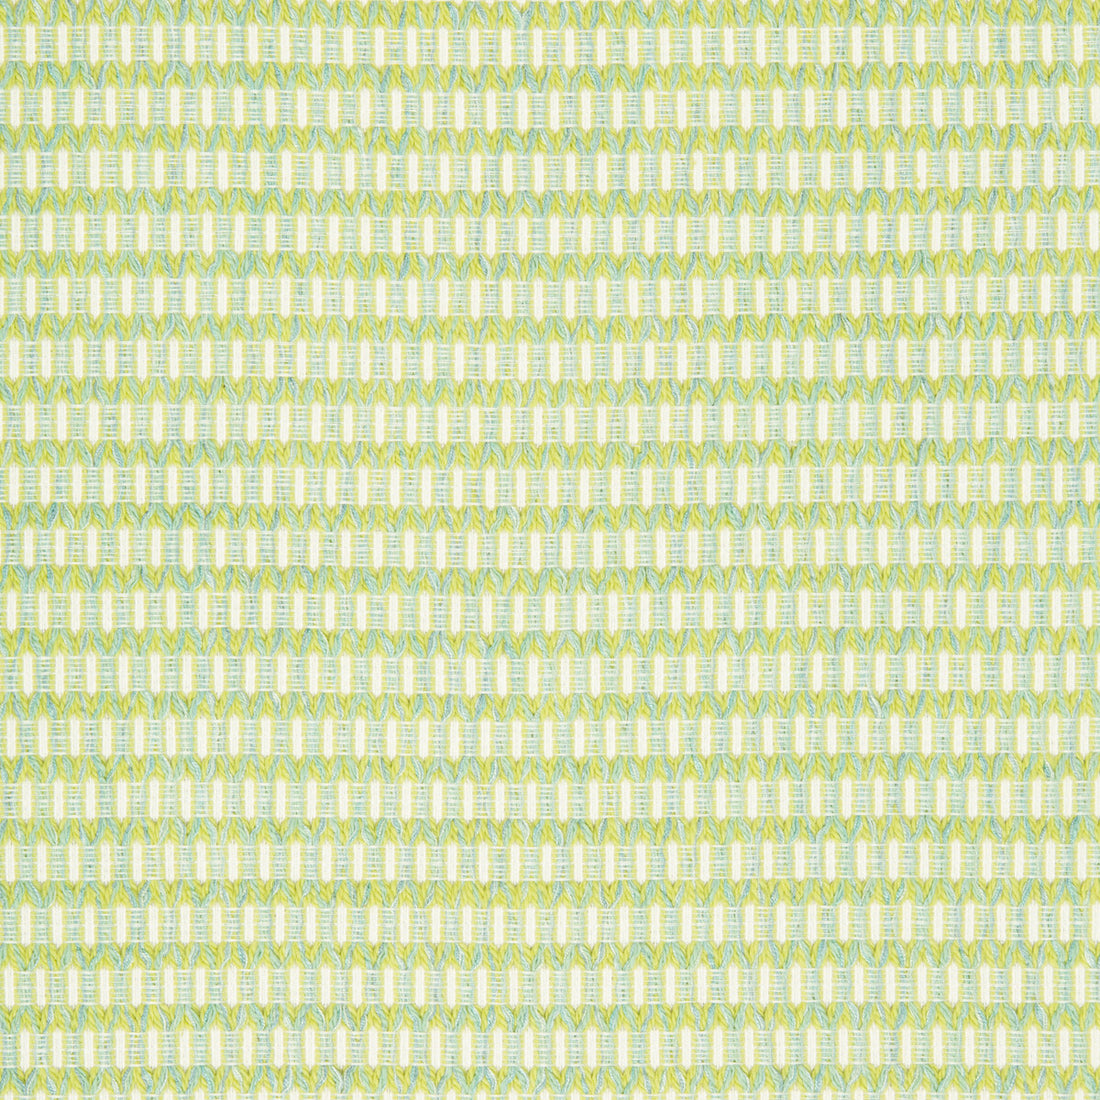 Kravet Design fabric in 34698-13 color - pattern 34698.13.0 - by Kravet Design in the Crypton Home collection